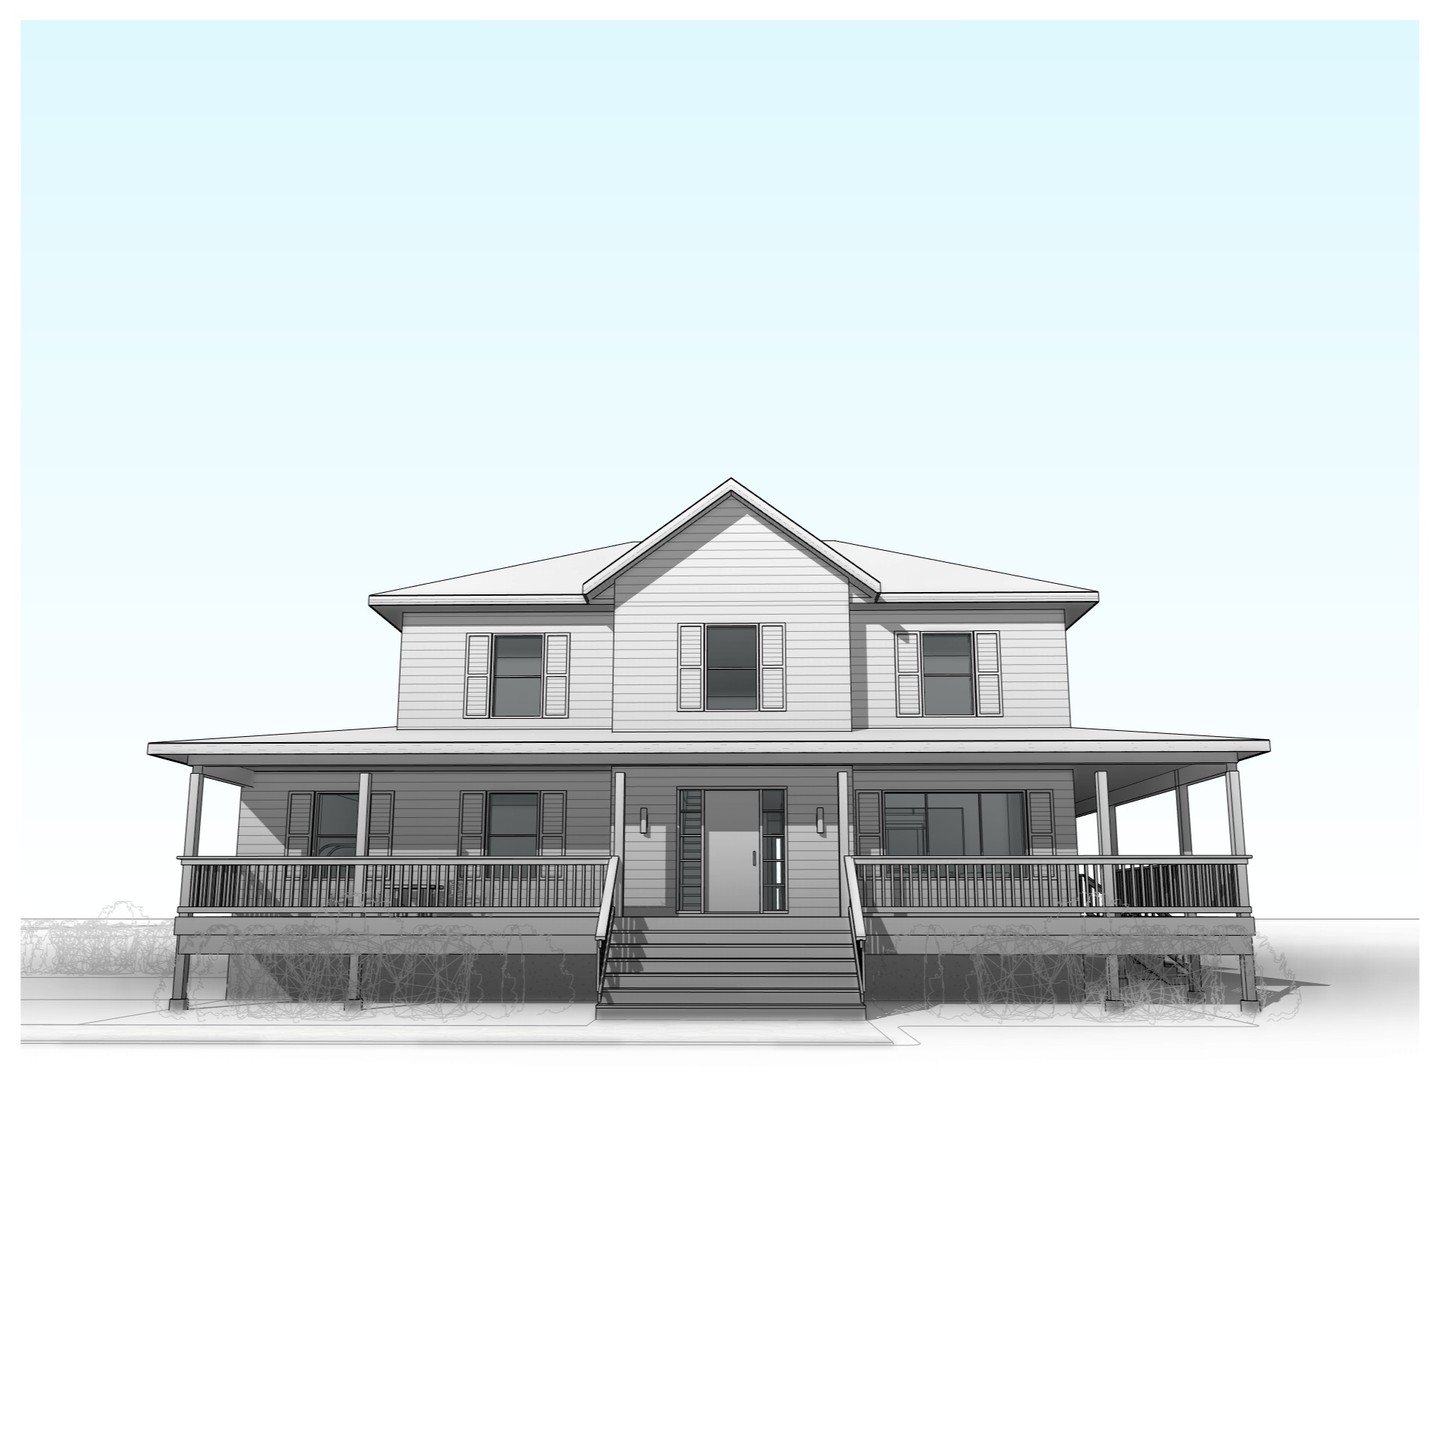 2 Storey Residence with attached garage and wrap-around porch. #residence #garage #traditional #colonial #timber #coveredporch #wraparoundporch #perspective #revit #architecture #aja #adamjodoinarchitectural #design